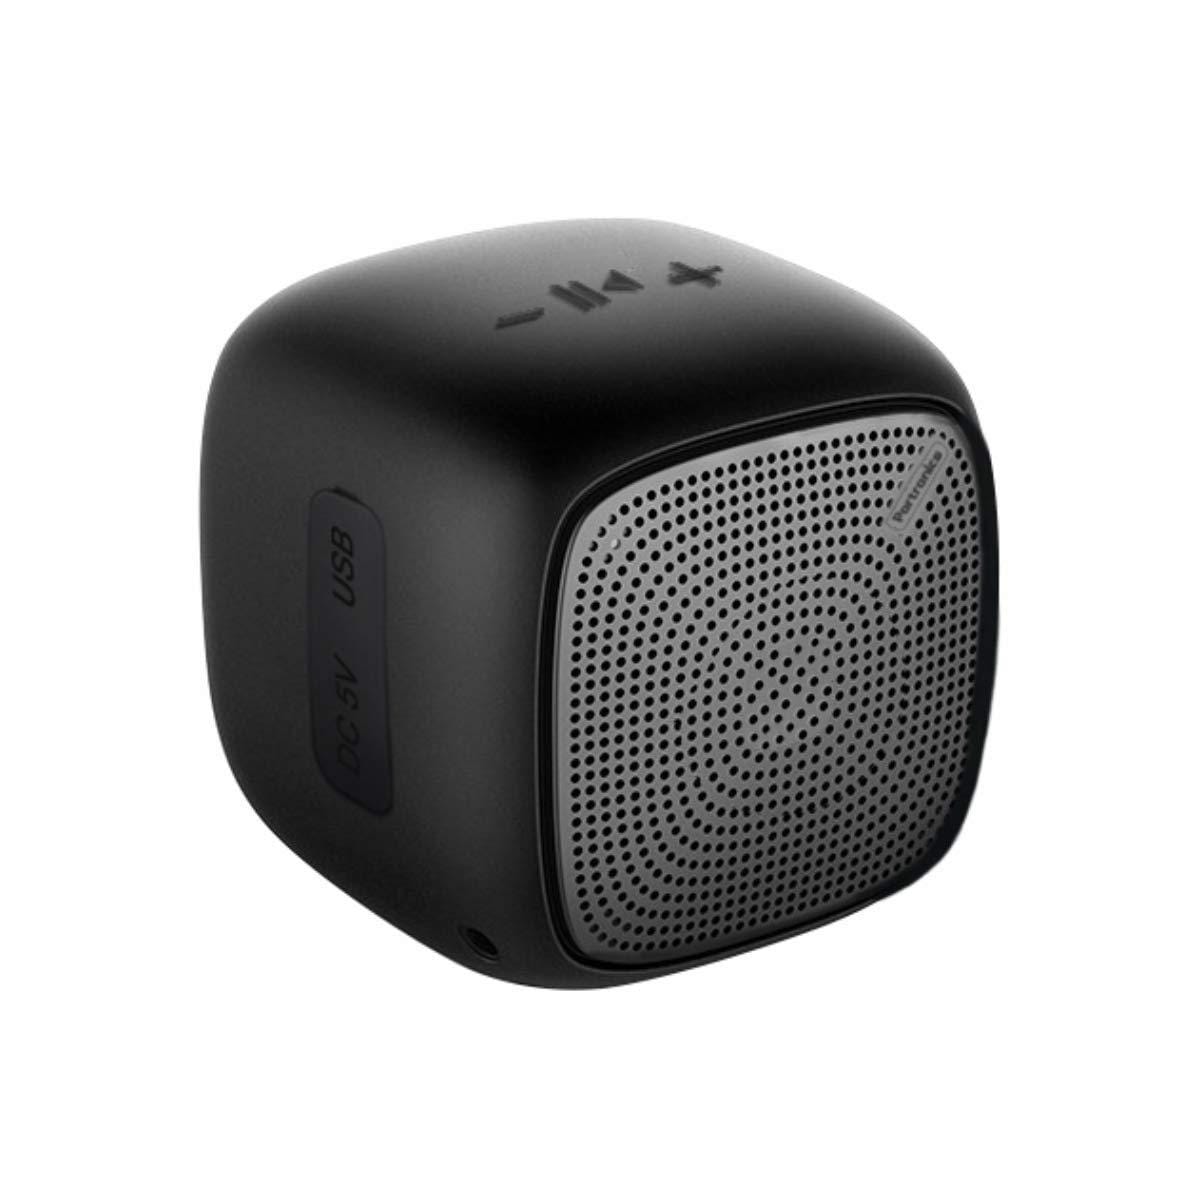 Products Portronics Bounce Portable Wireless Bluetooth Speaker with FM & USB Music-Bluetooth Speakers-dealsplant